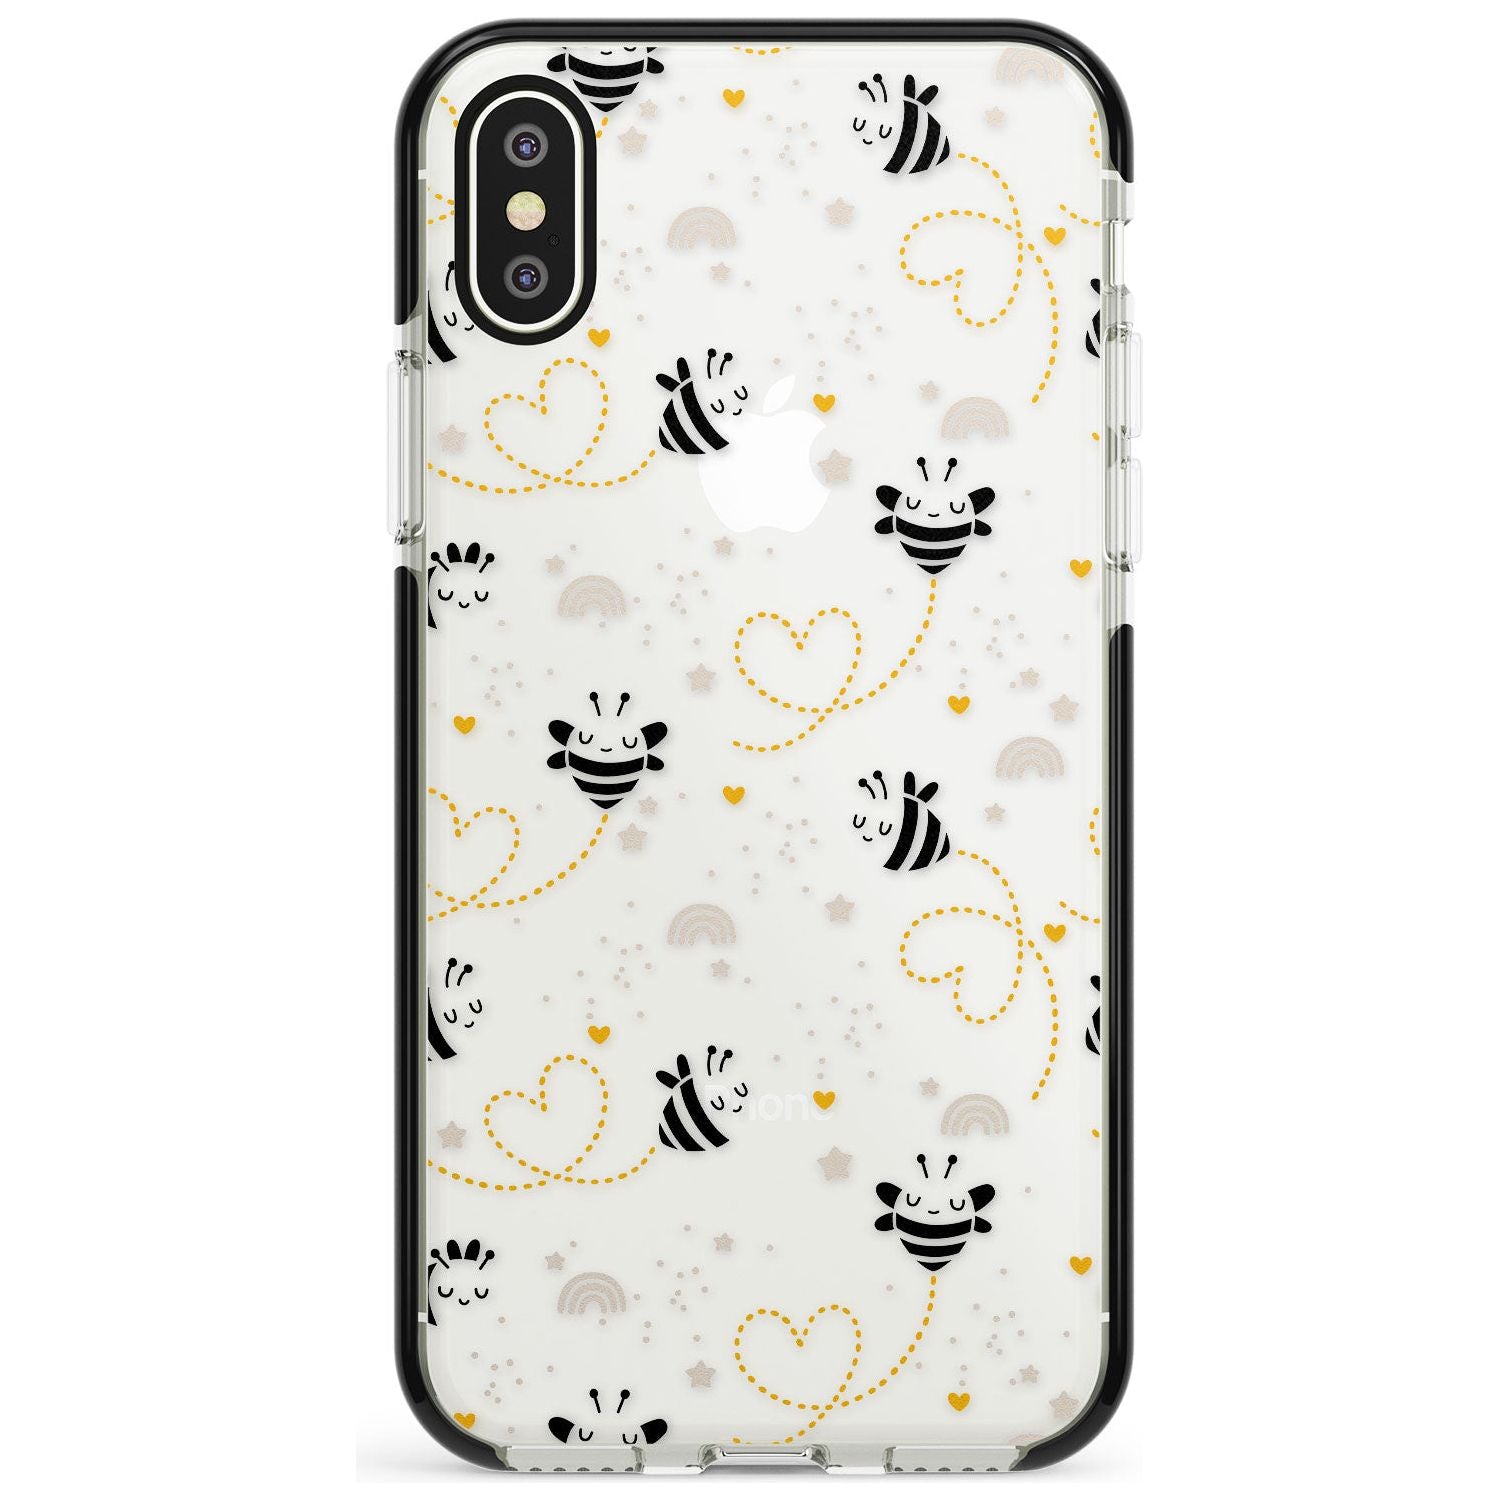 Sweet as Honey Patterns: Bees & Hearts (Clear) Black Impact Phone Case for iPhone X XS Max XR